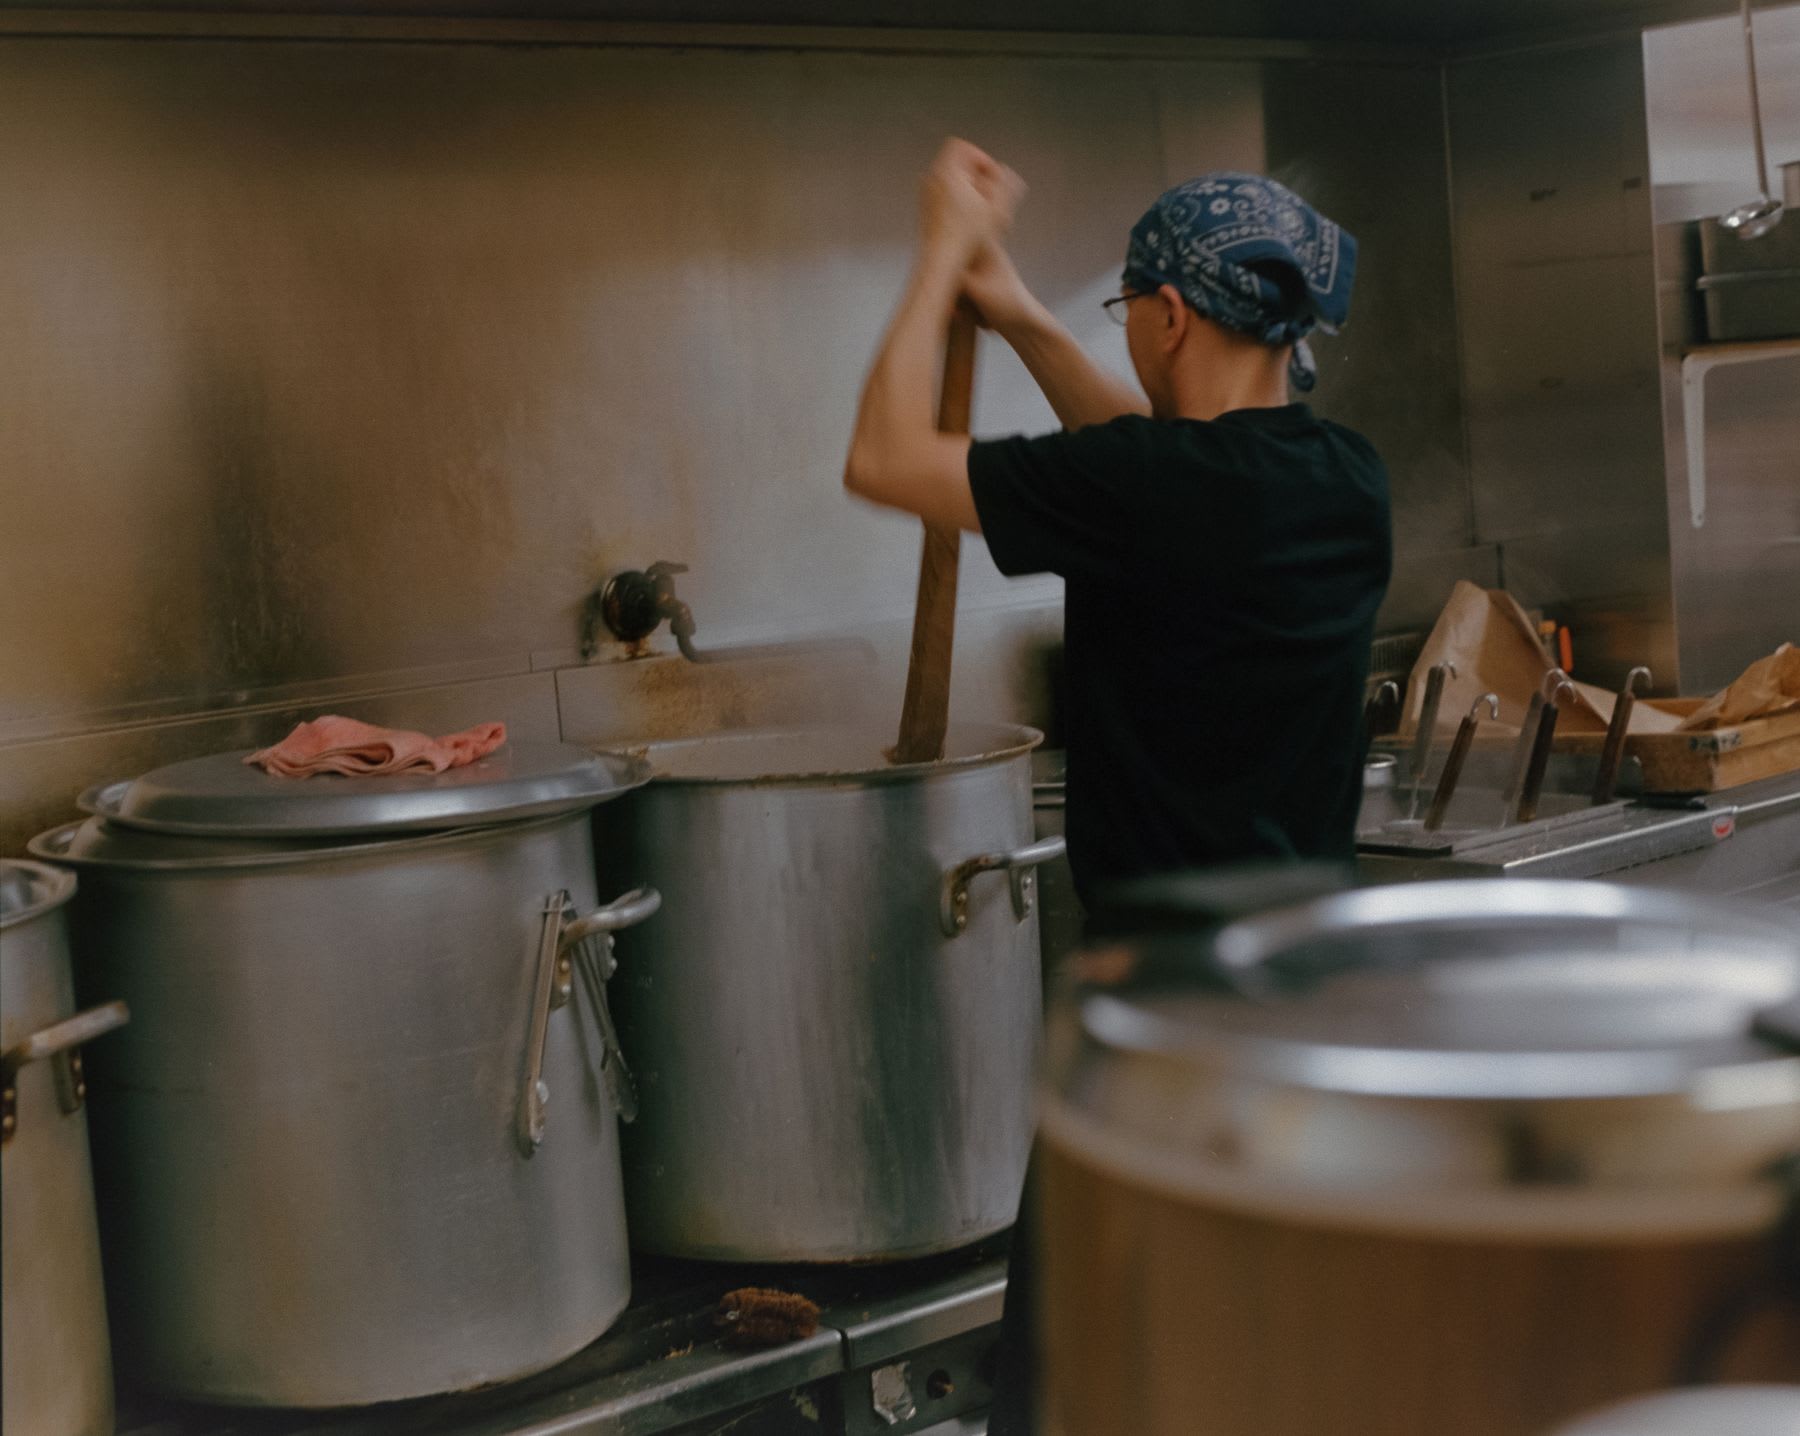 A person has their back turned and is stirring a large pan in a kitchen